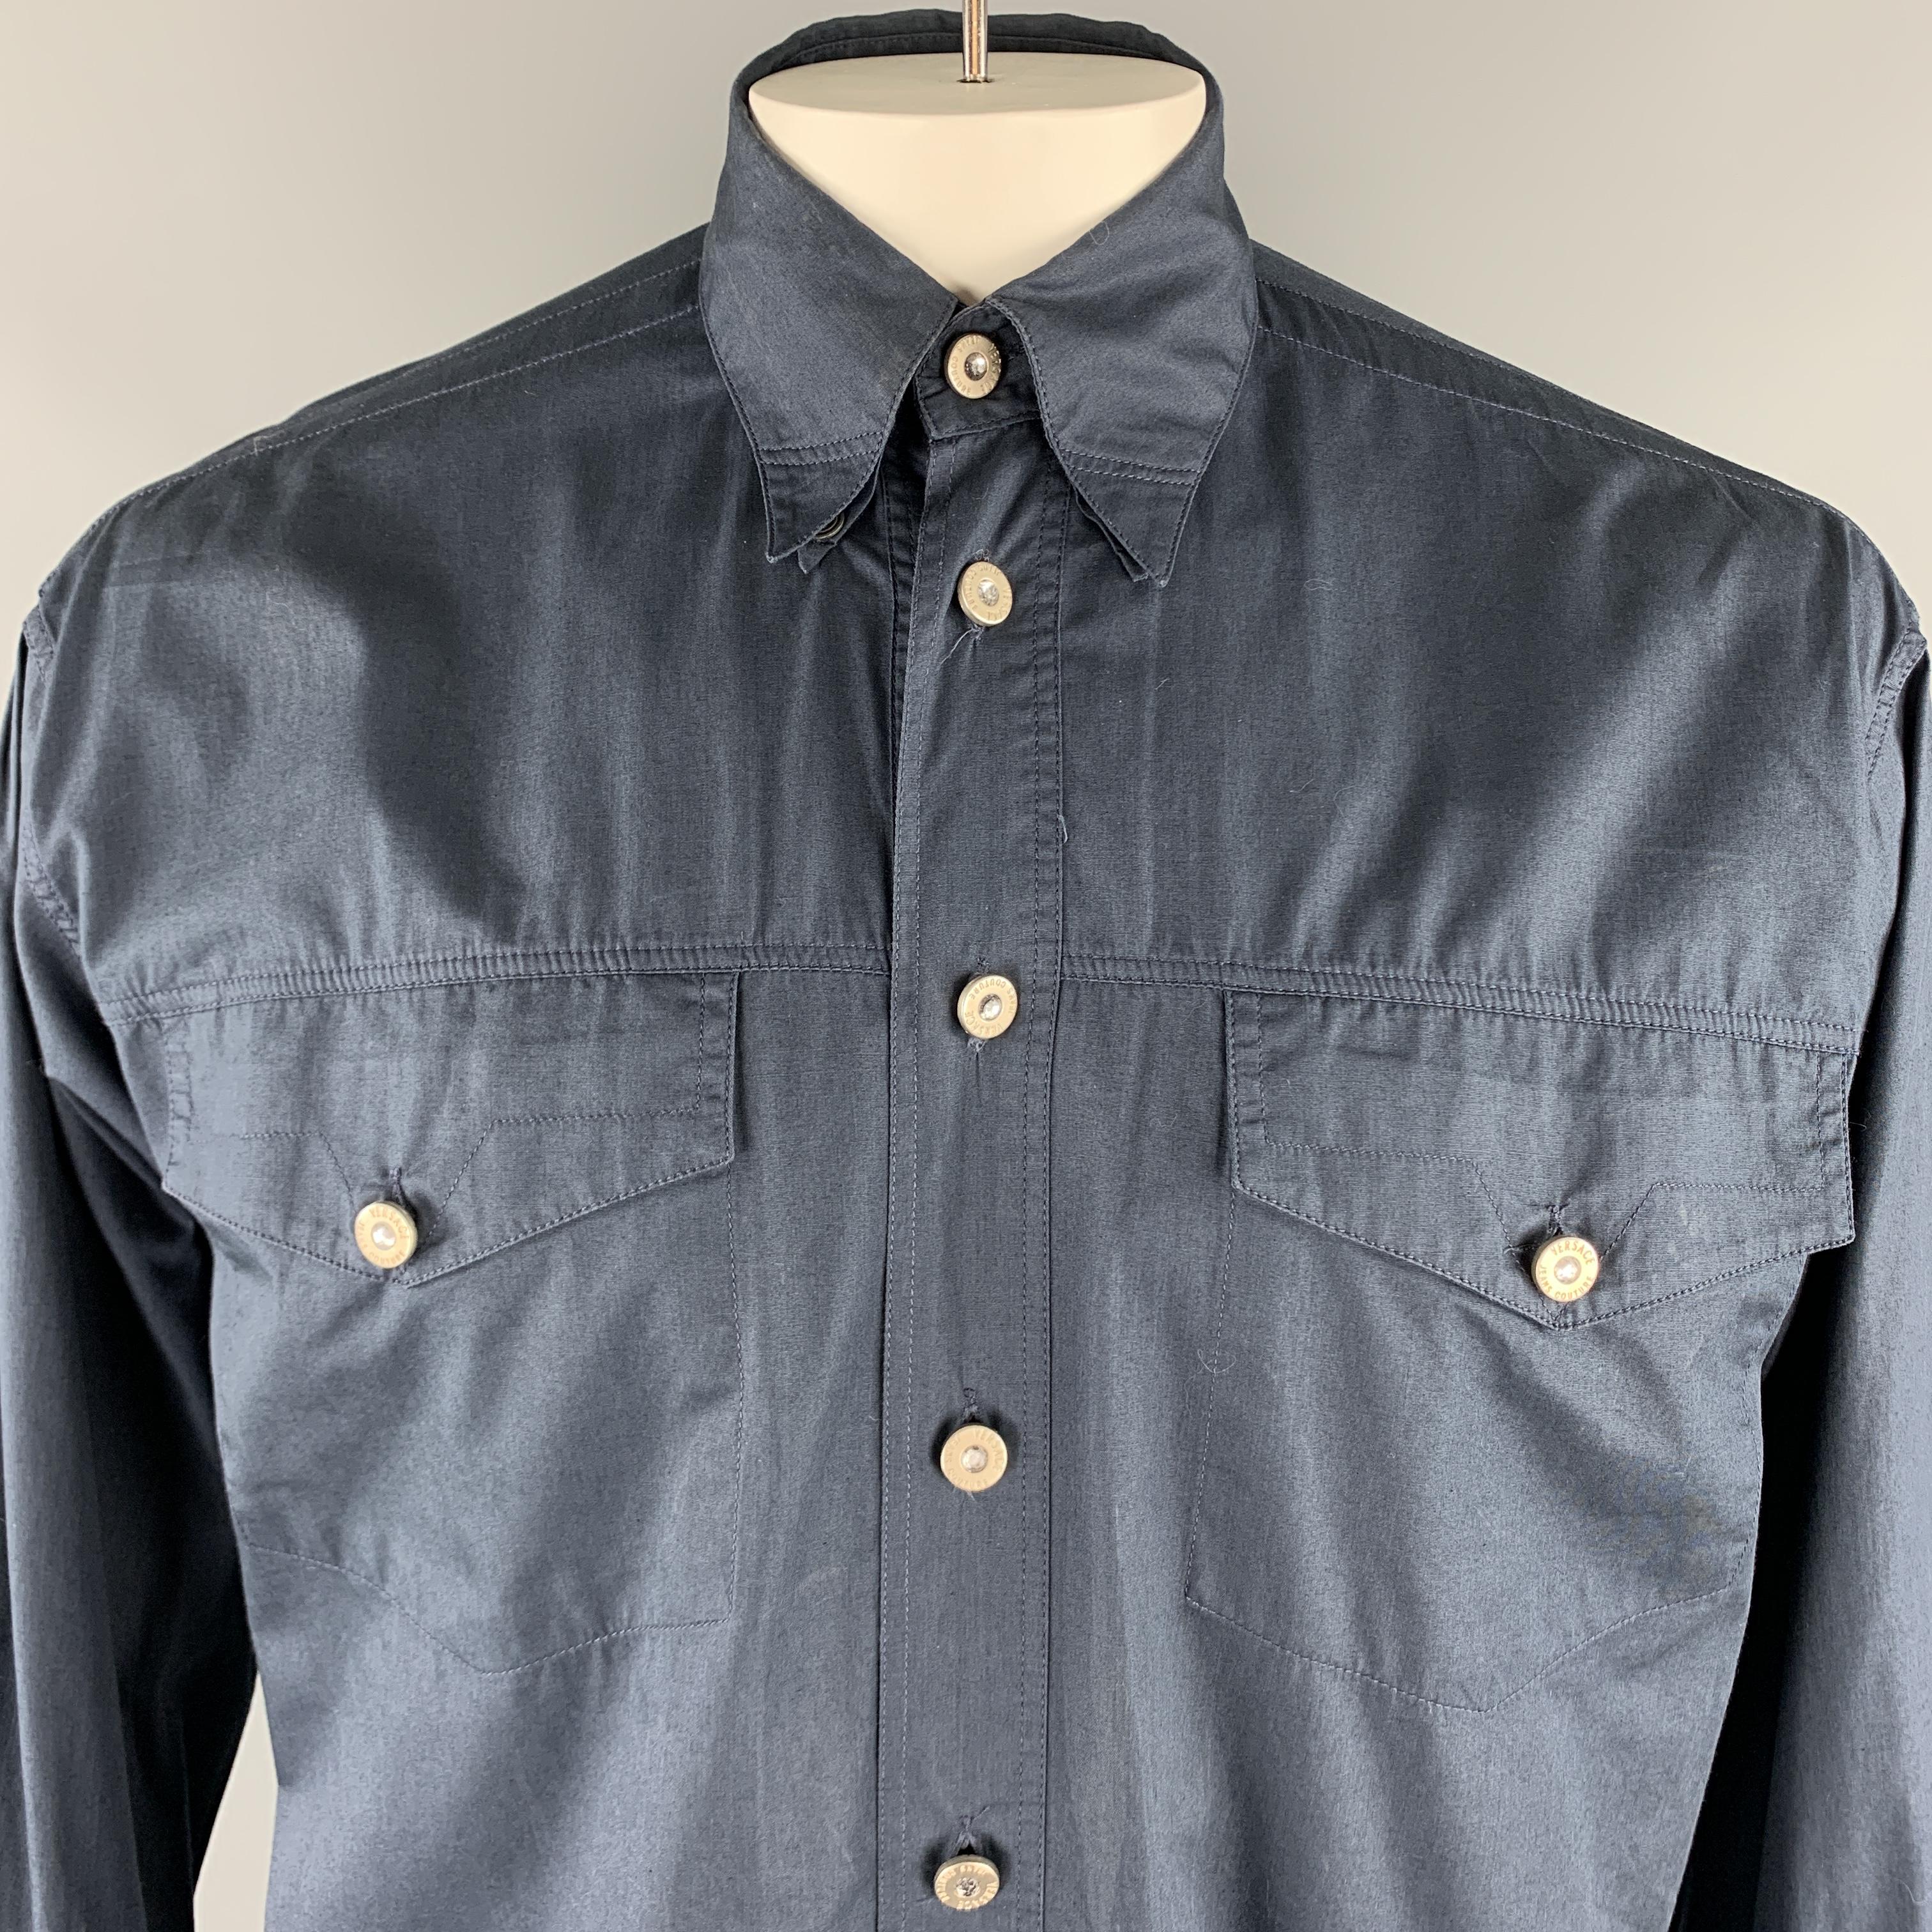 Vintage VERSACE JEANS COUTURE long sleeve shirt comes in a solid navy cotton material, with silver tone metal embellished buttons, patch pockets, and buttoned cuffs, button down. Made in Italy. 

Very Good Pre-Owned Condition.
Marked: 15 1/2